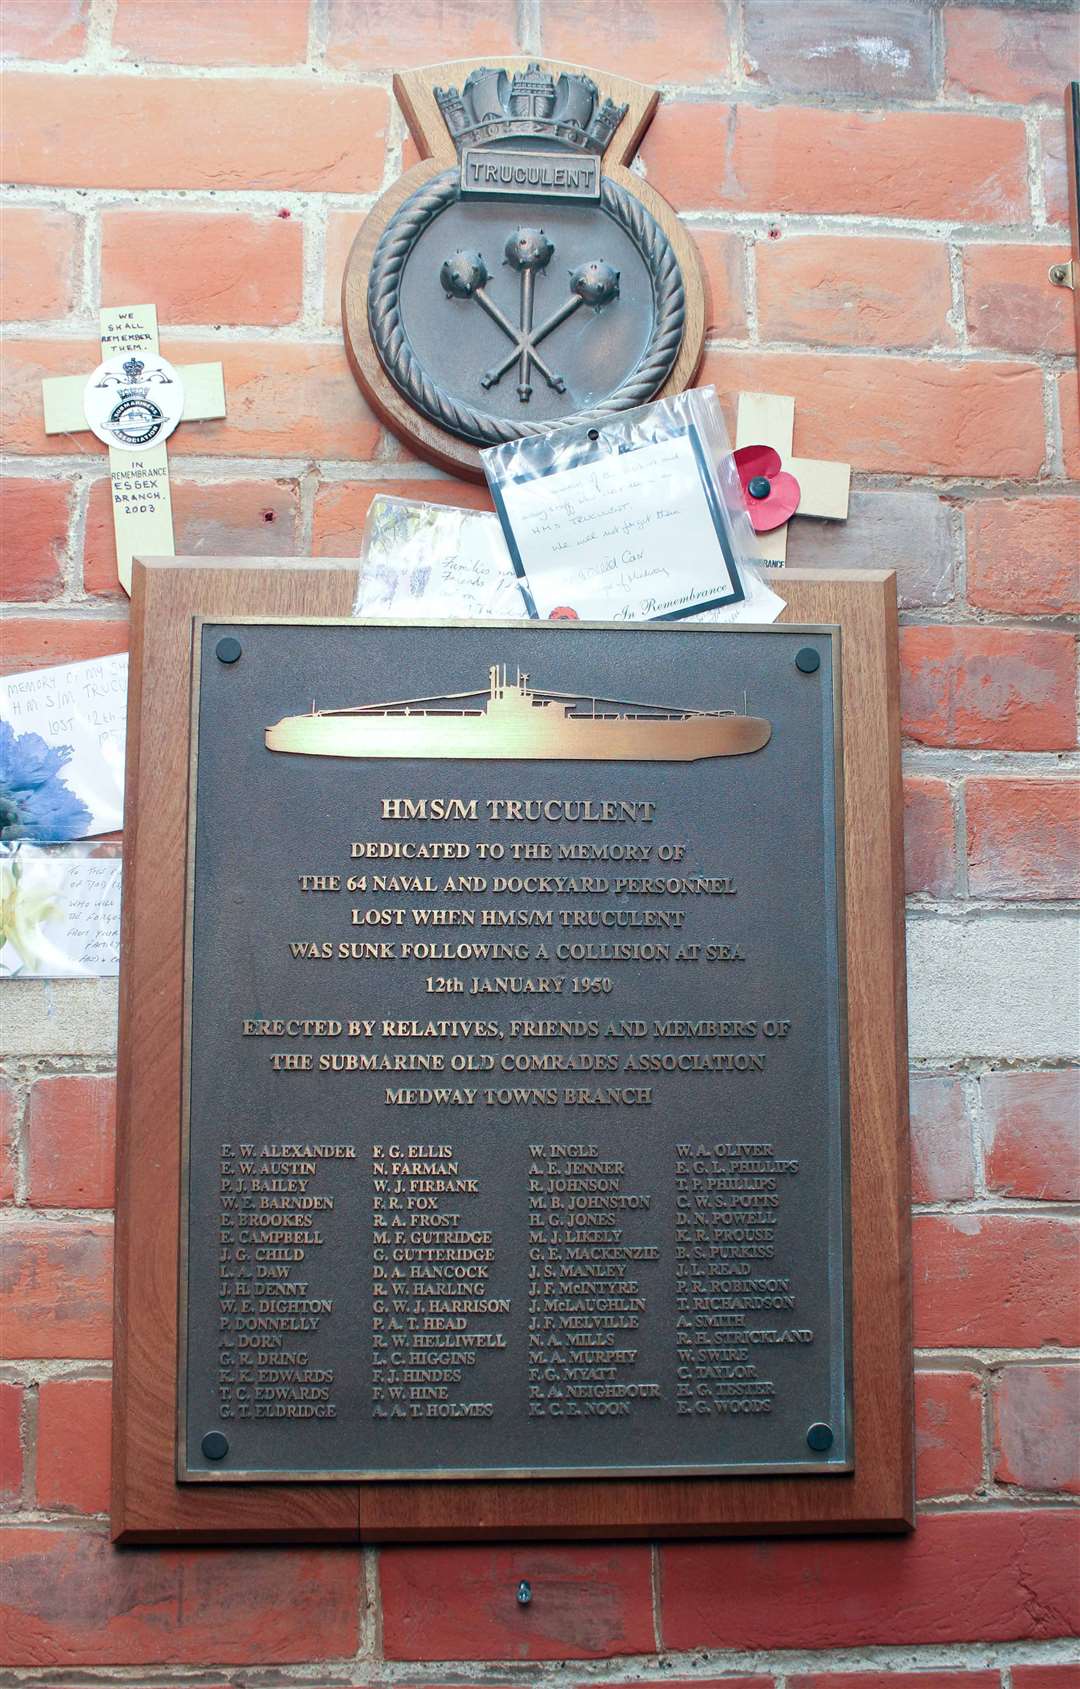 The memorial at St George's Centre to the men who lost their lives that night.